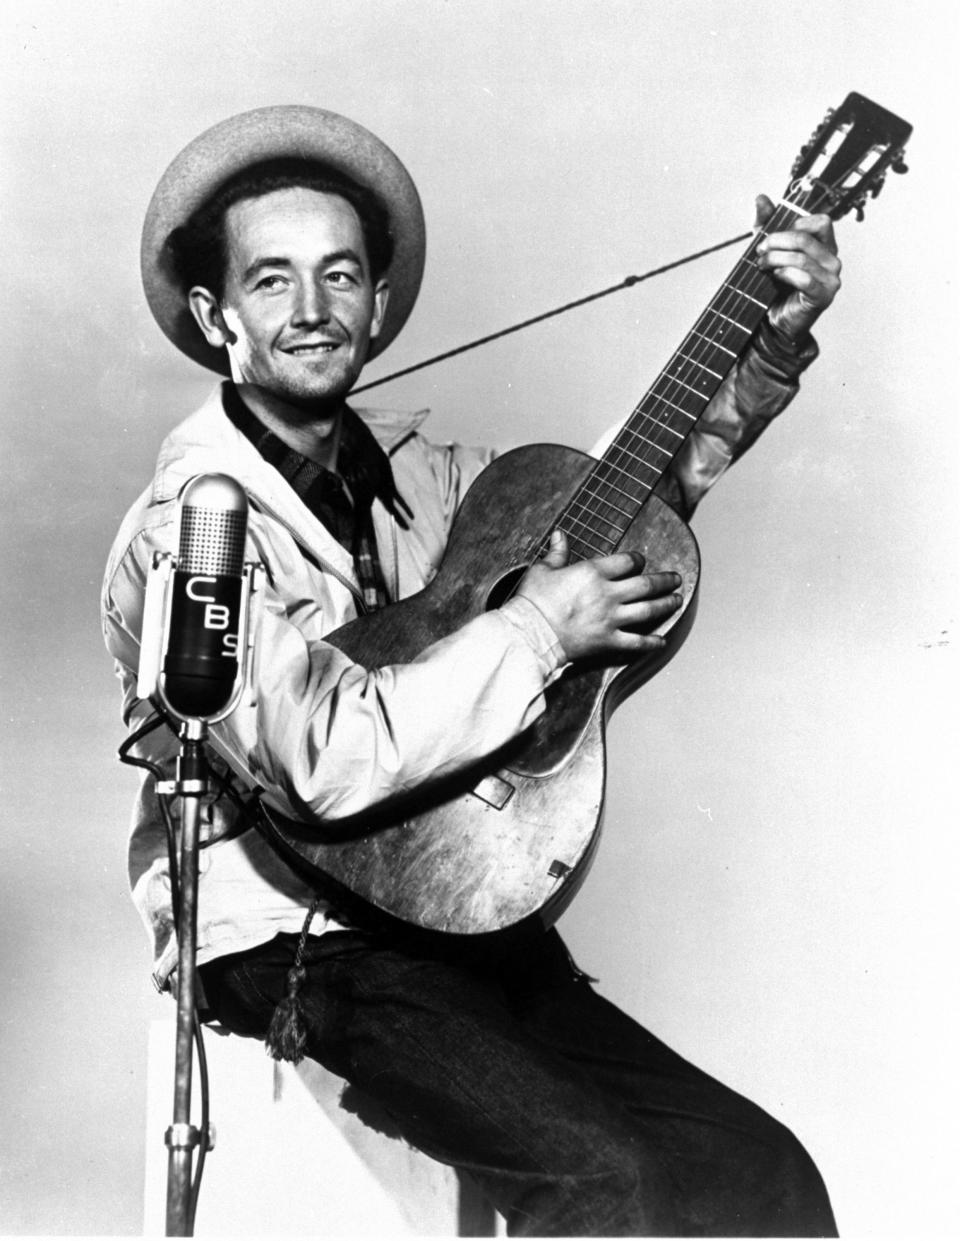 A 1944 file photo shows singer-songwriter Woody Guthrie, the dean of American folk music.